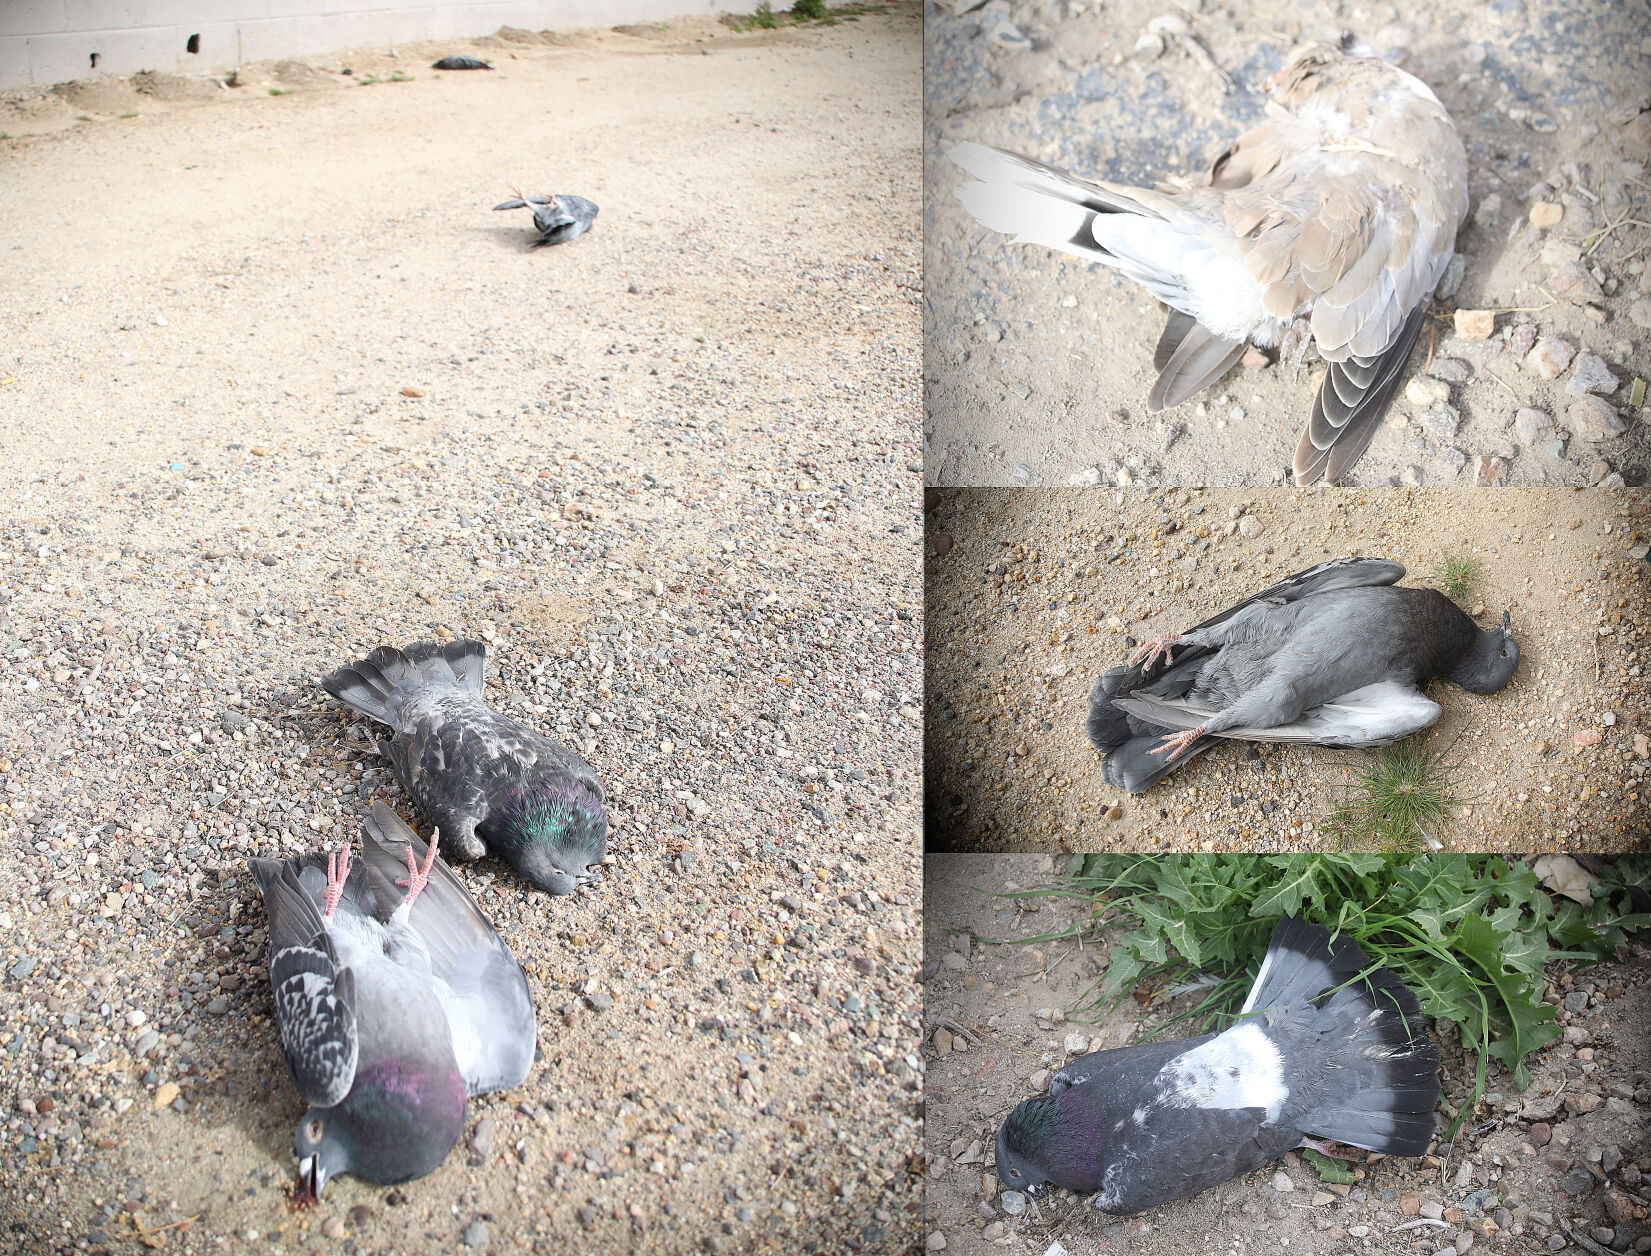 Uptick in dead pigeon sightings concerns Willcox residents